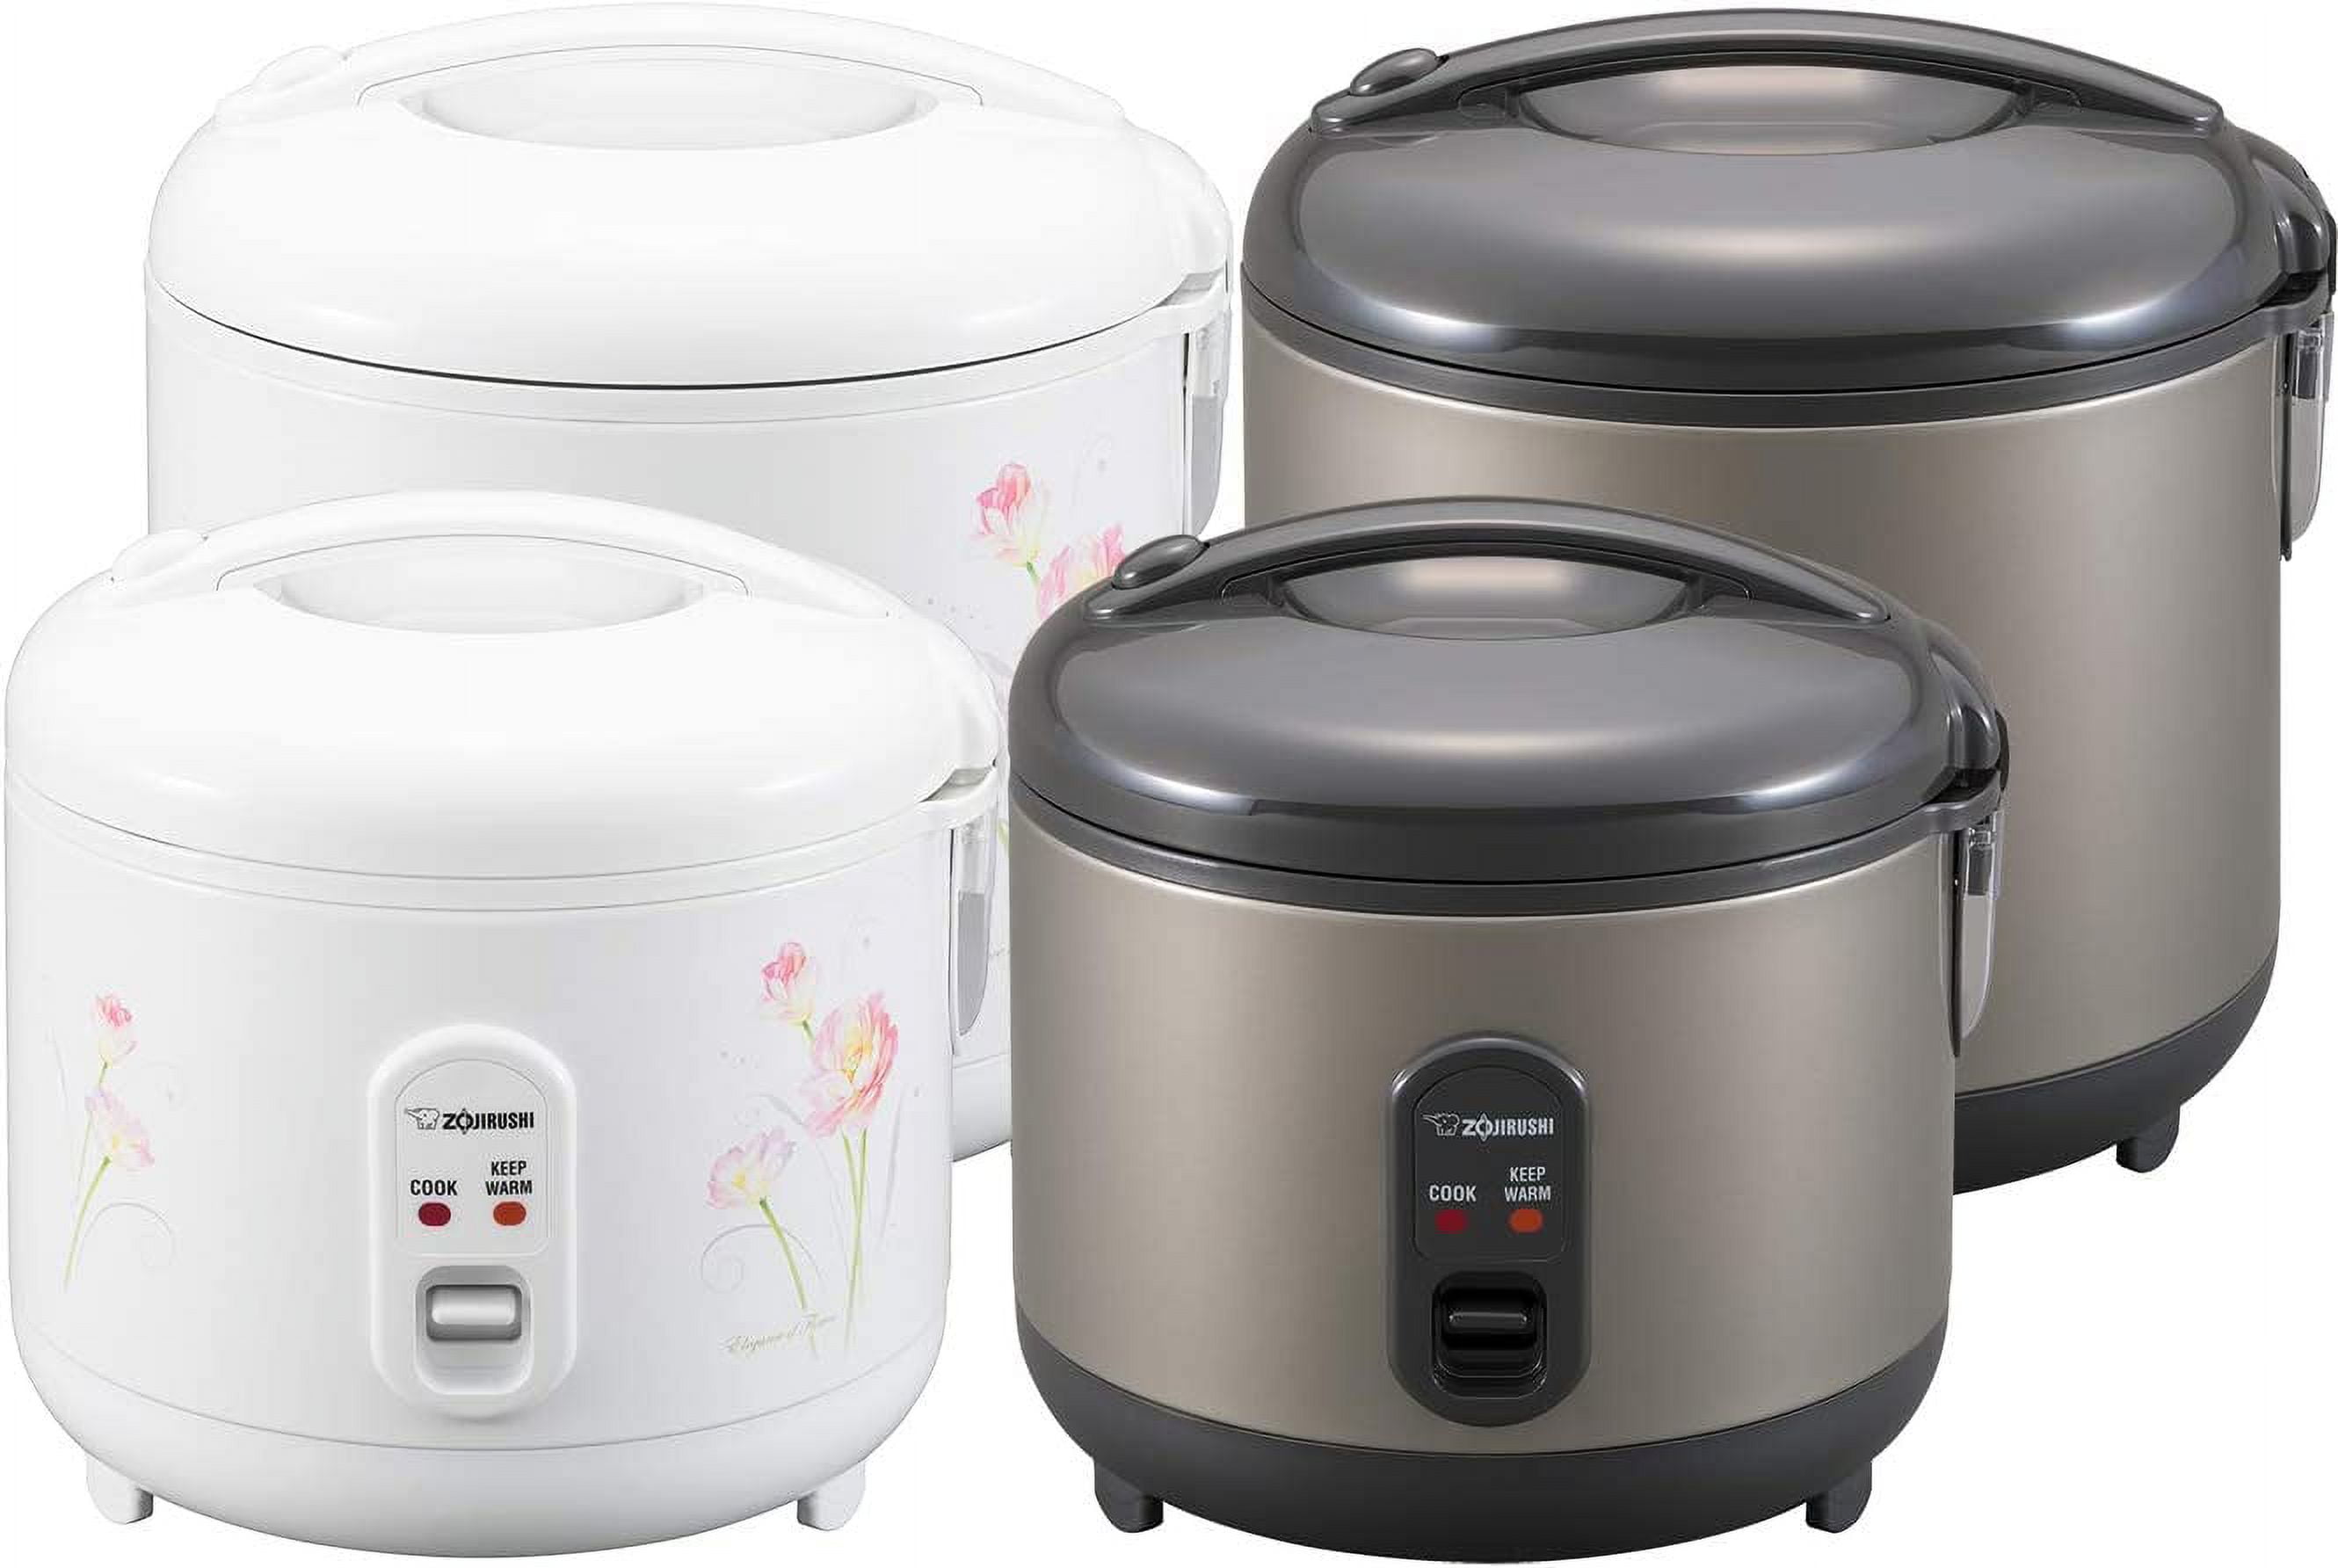 $45 for a barely used Zojirushi rice cooker. : r/ThriftStoreHauls